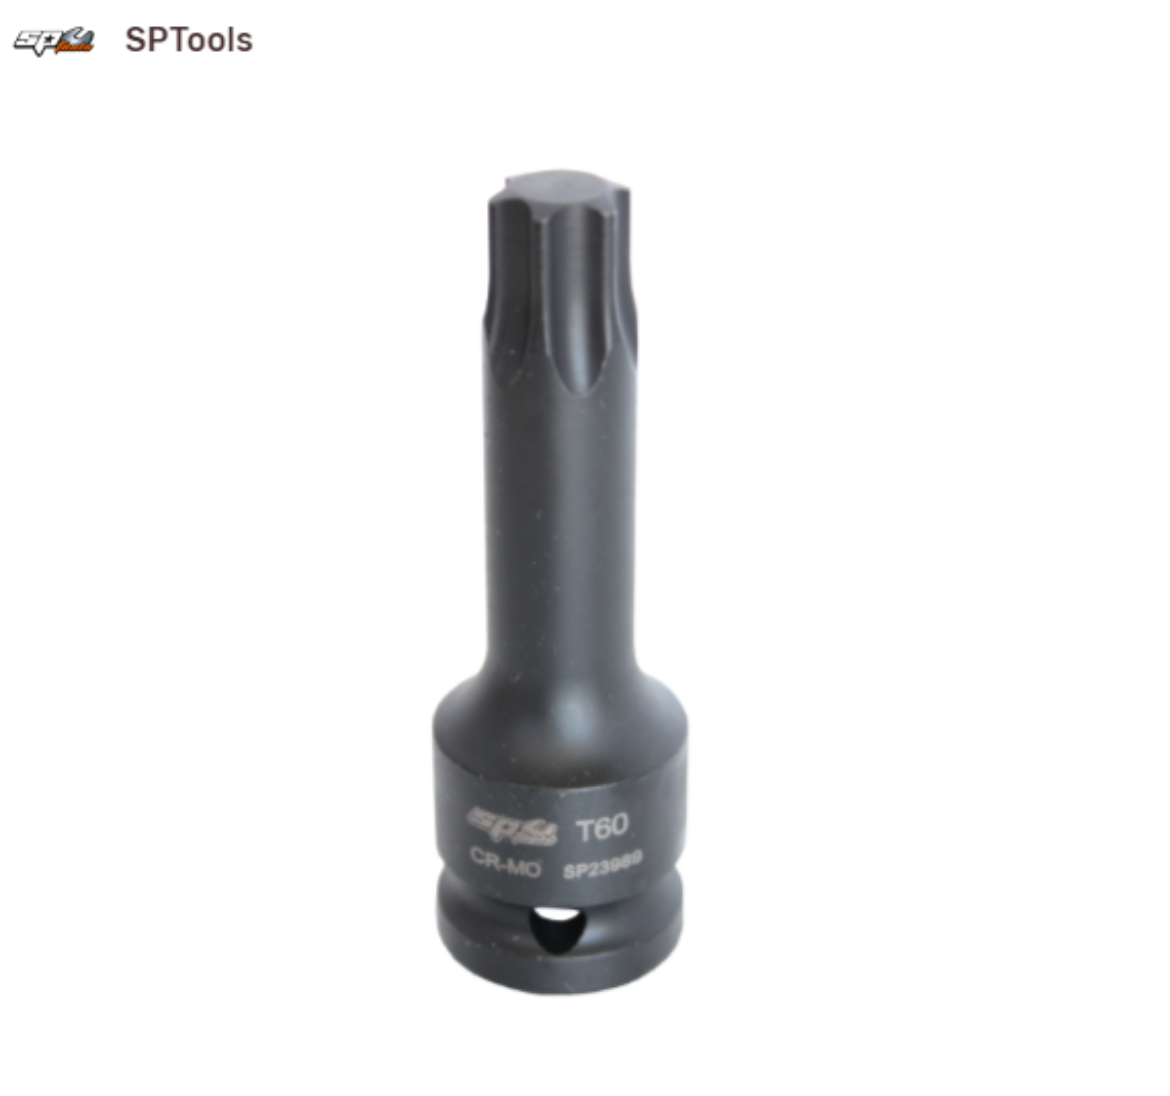 Picture of SOCKET IMPACT 1/2"DR TORX T50 SP TOOLS